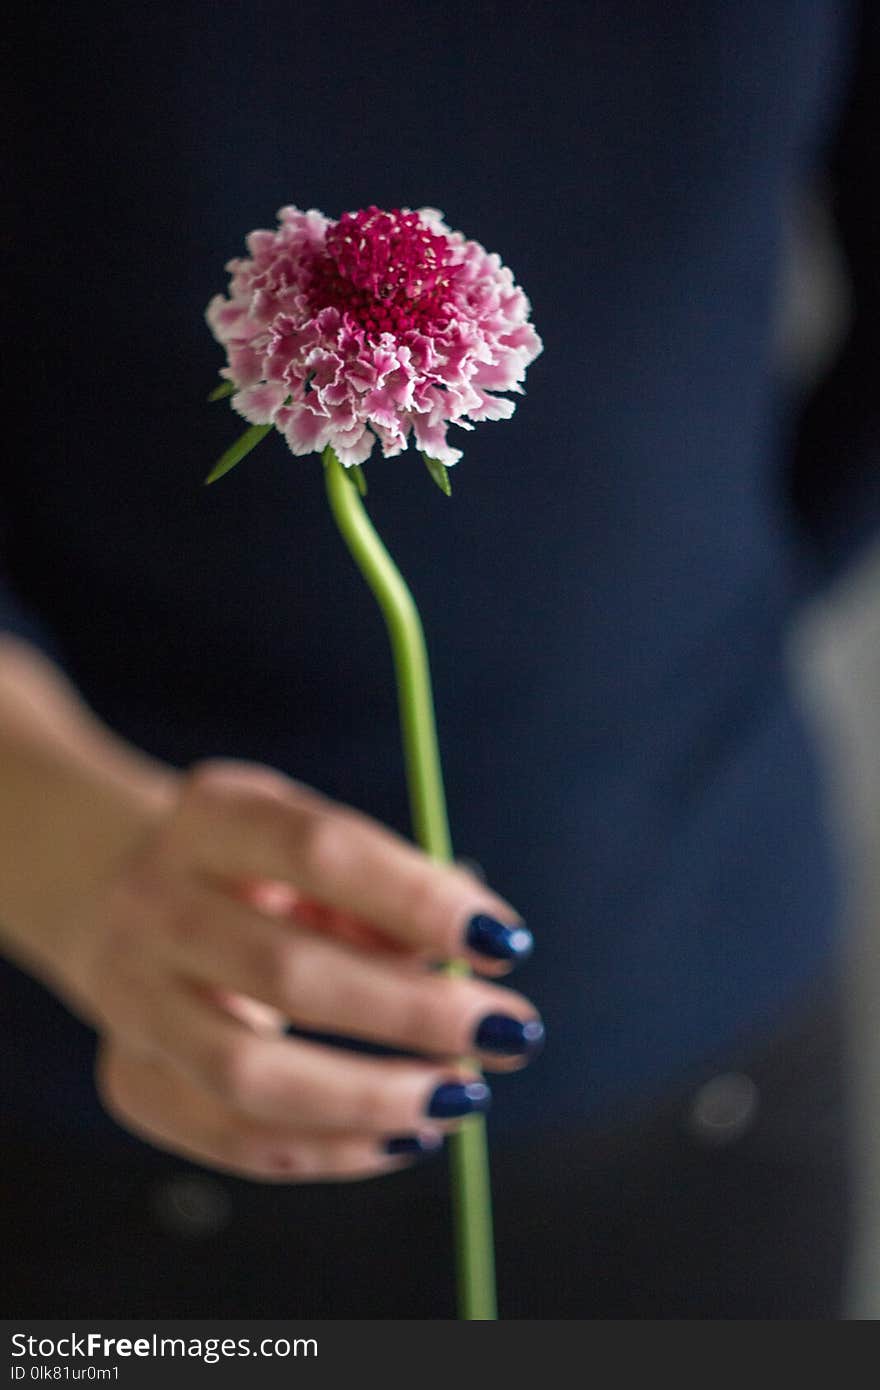 One scabiozy pink flower in the right hand on a dark background. One scabiozy pink flower in the right hand on a dark background